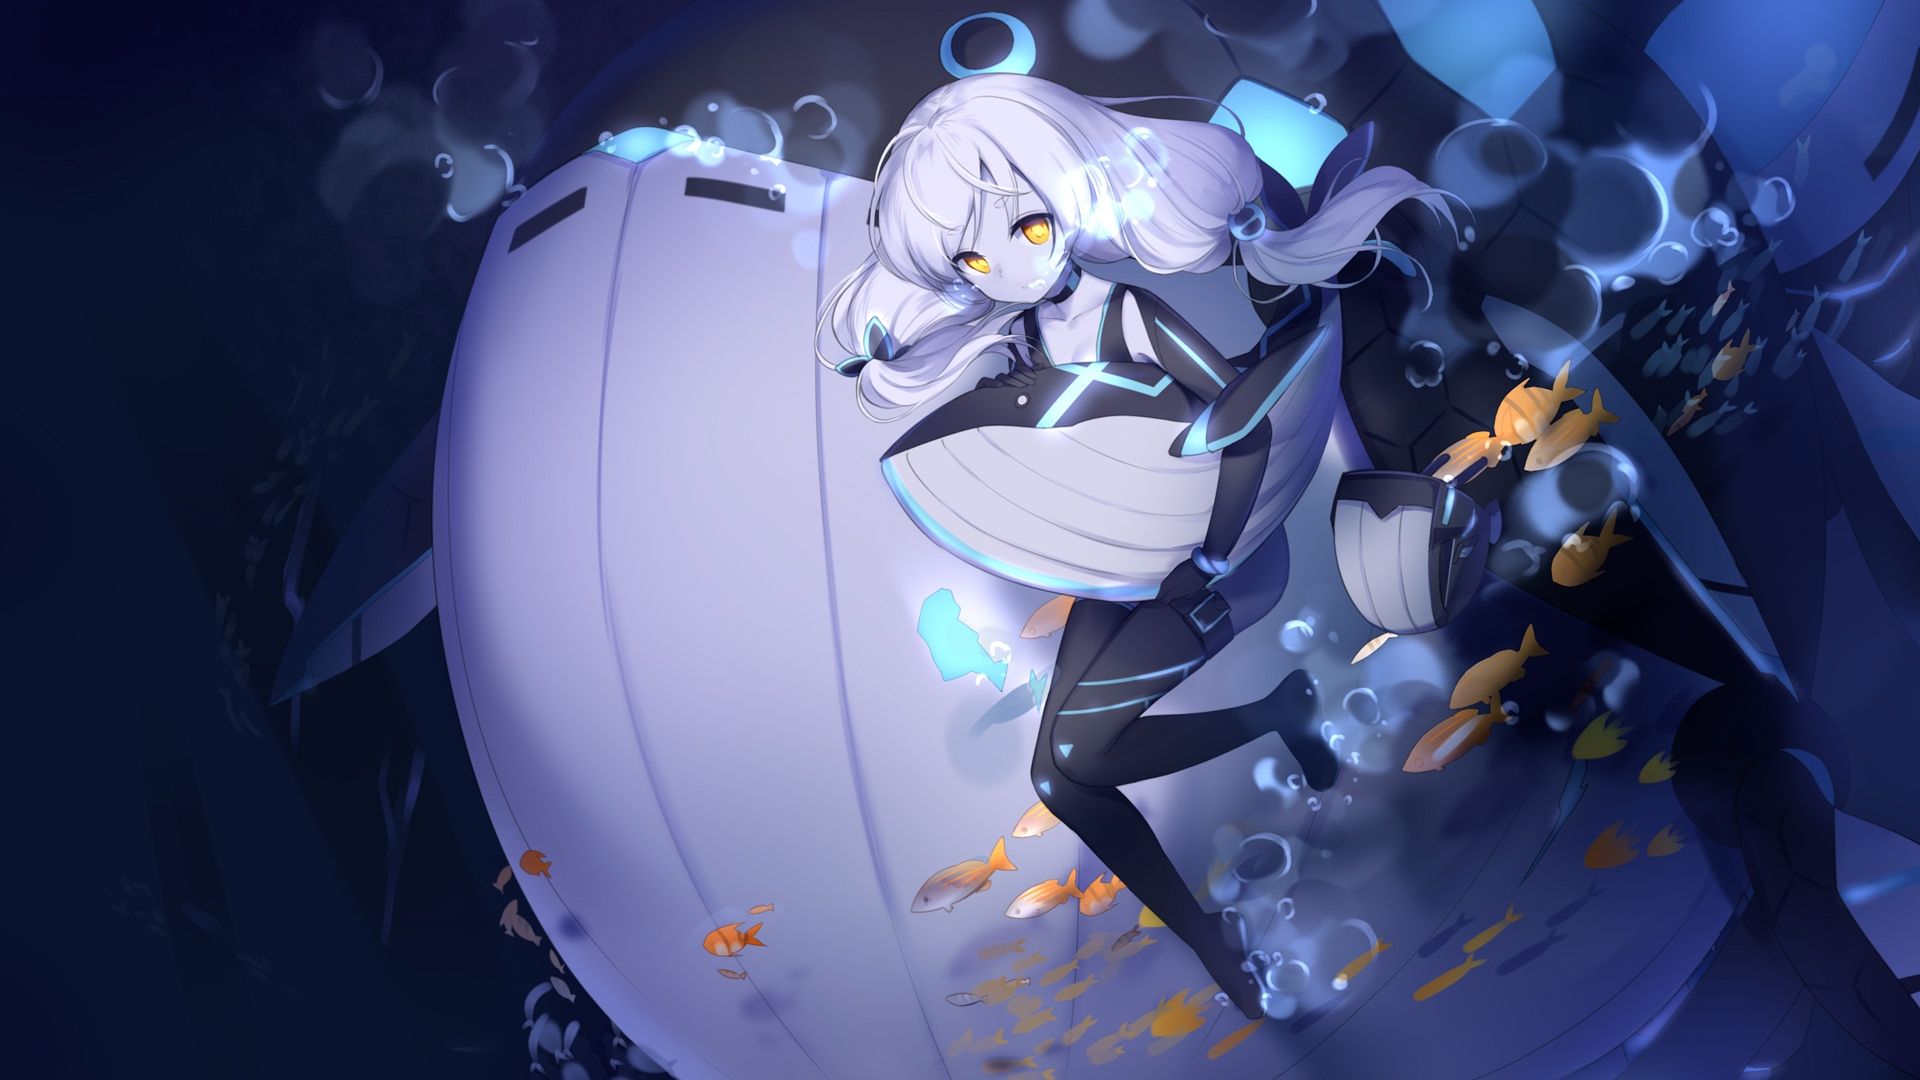 Download 1920x1080 Anime Girl, Underwater, Fishes, White Hair, Loli, Water Bubbles Wallpaper for Widescreen